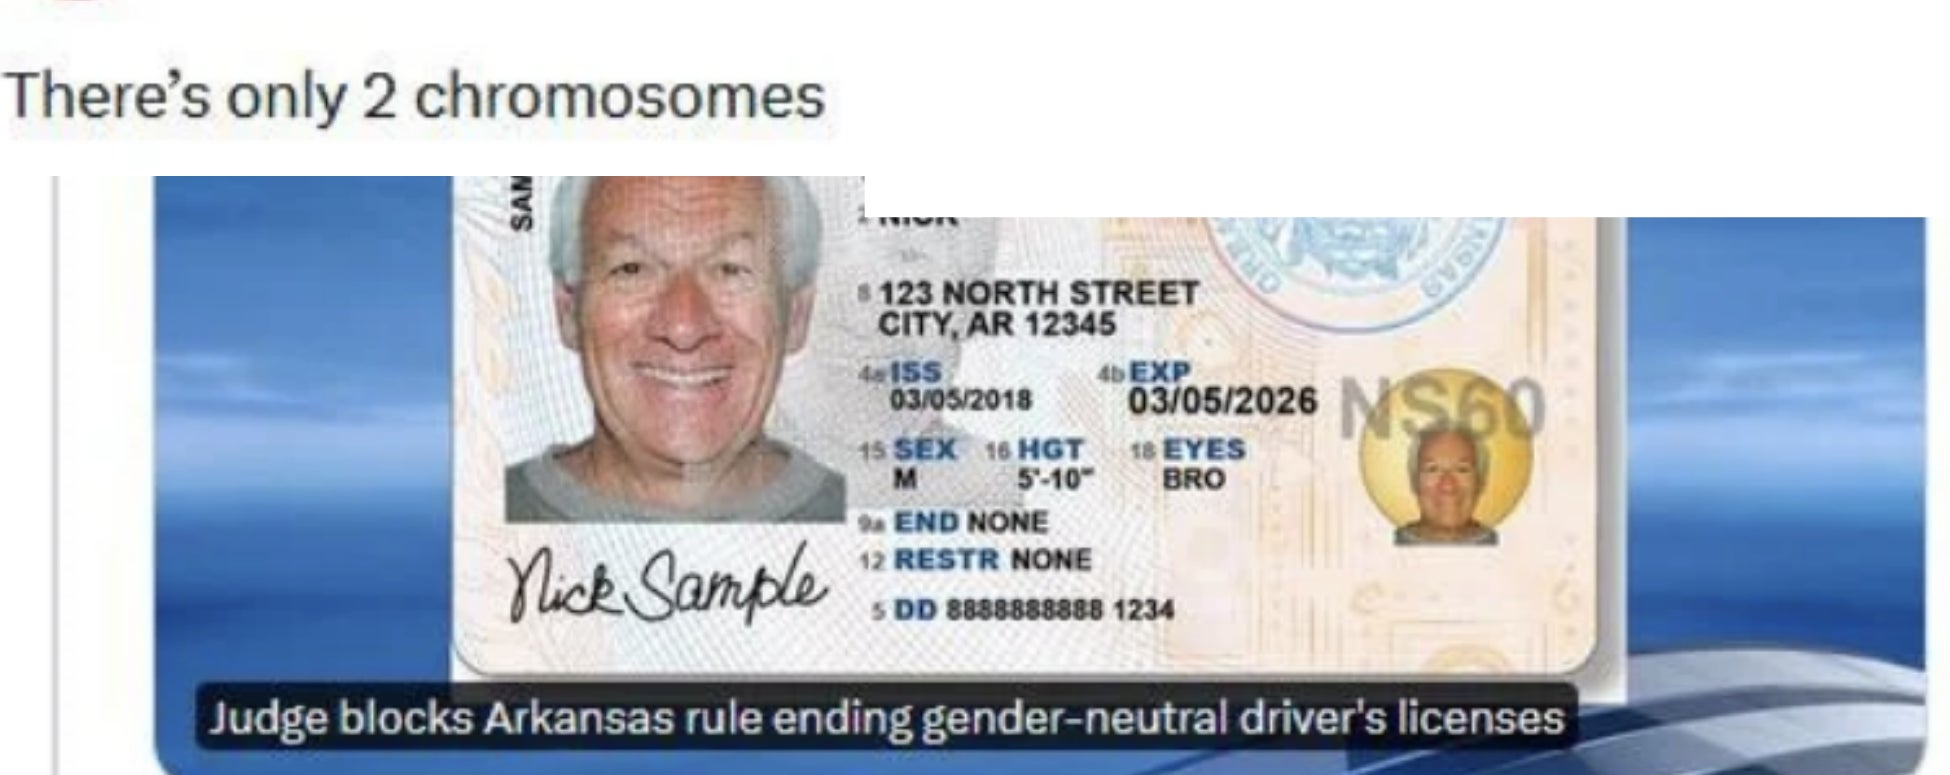 A news tweet by KATV News about Arkansas&#x27; policy on gender-neutral driver&#x27;s licenses with a sample license image and a highlighted comment &quot;There’s only 2 chromosomes.&quot;